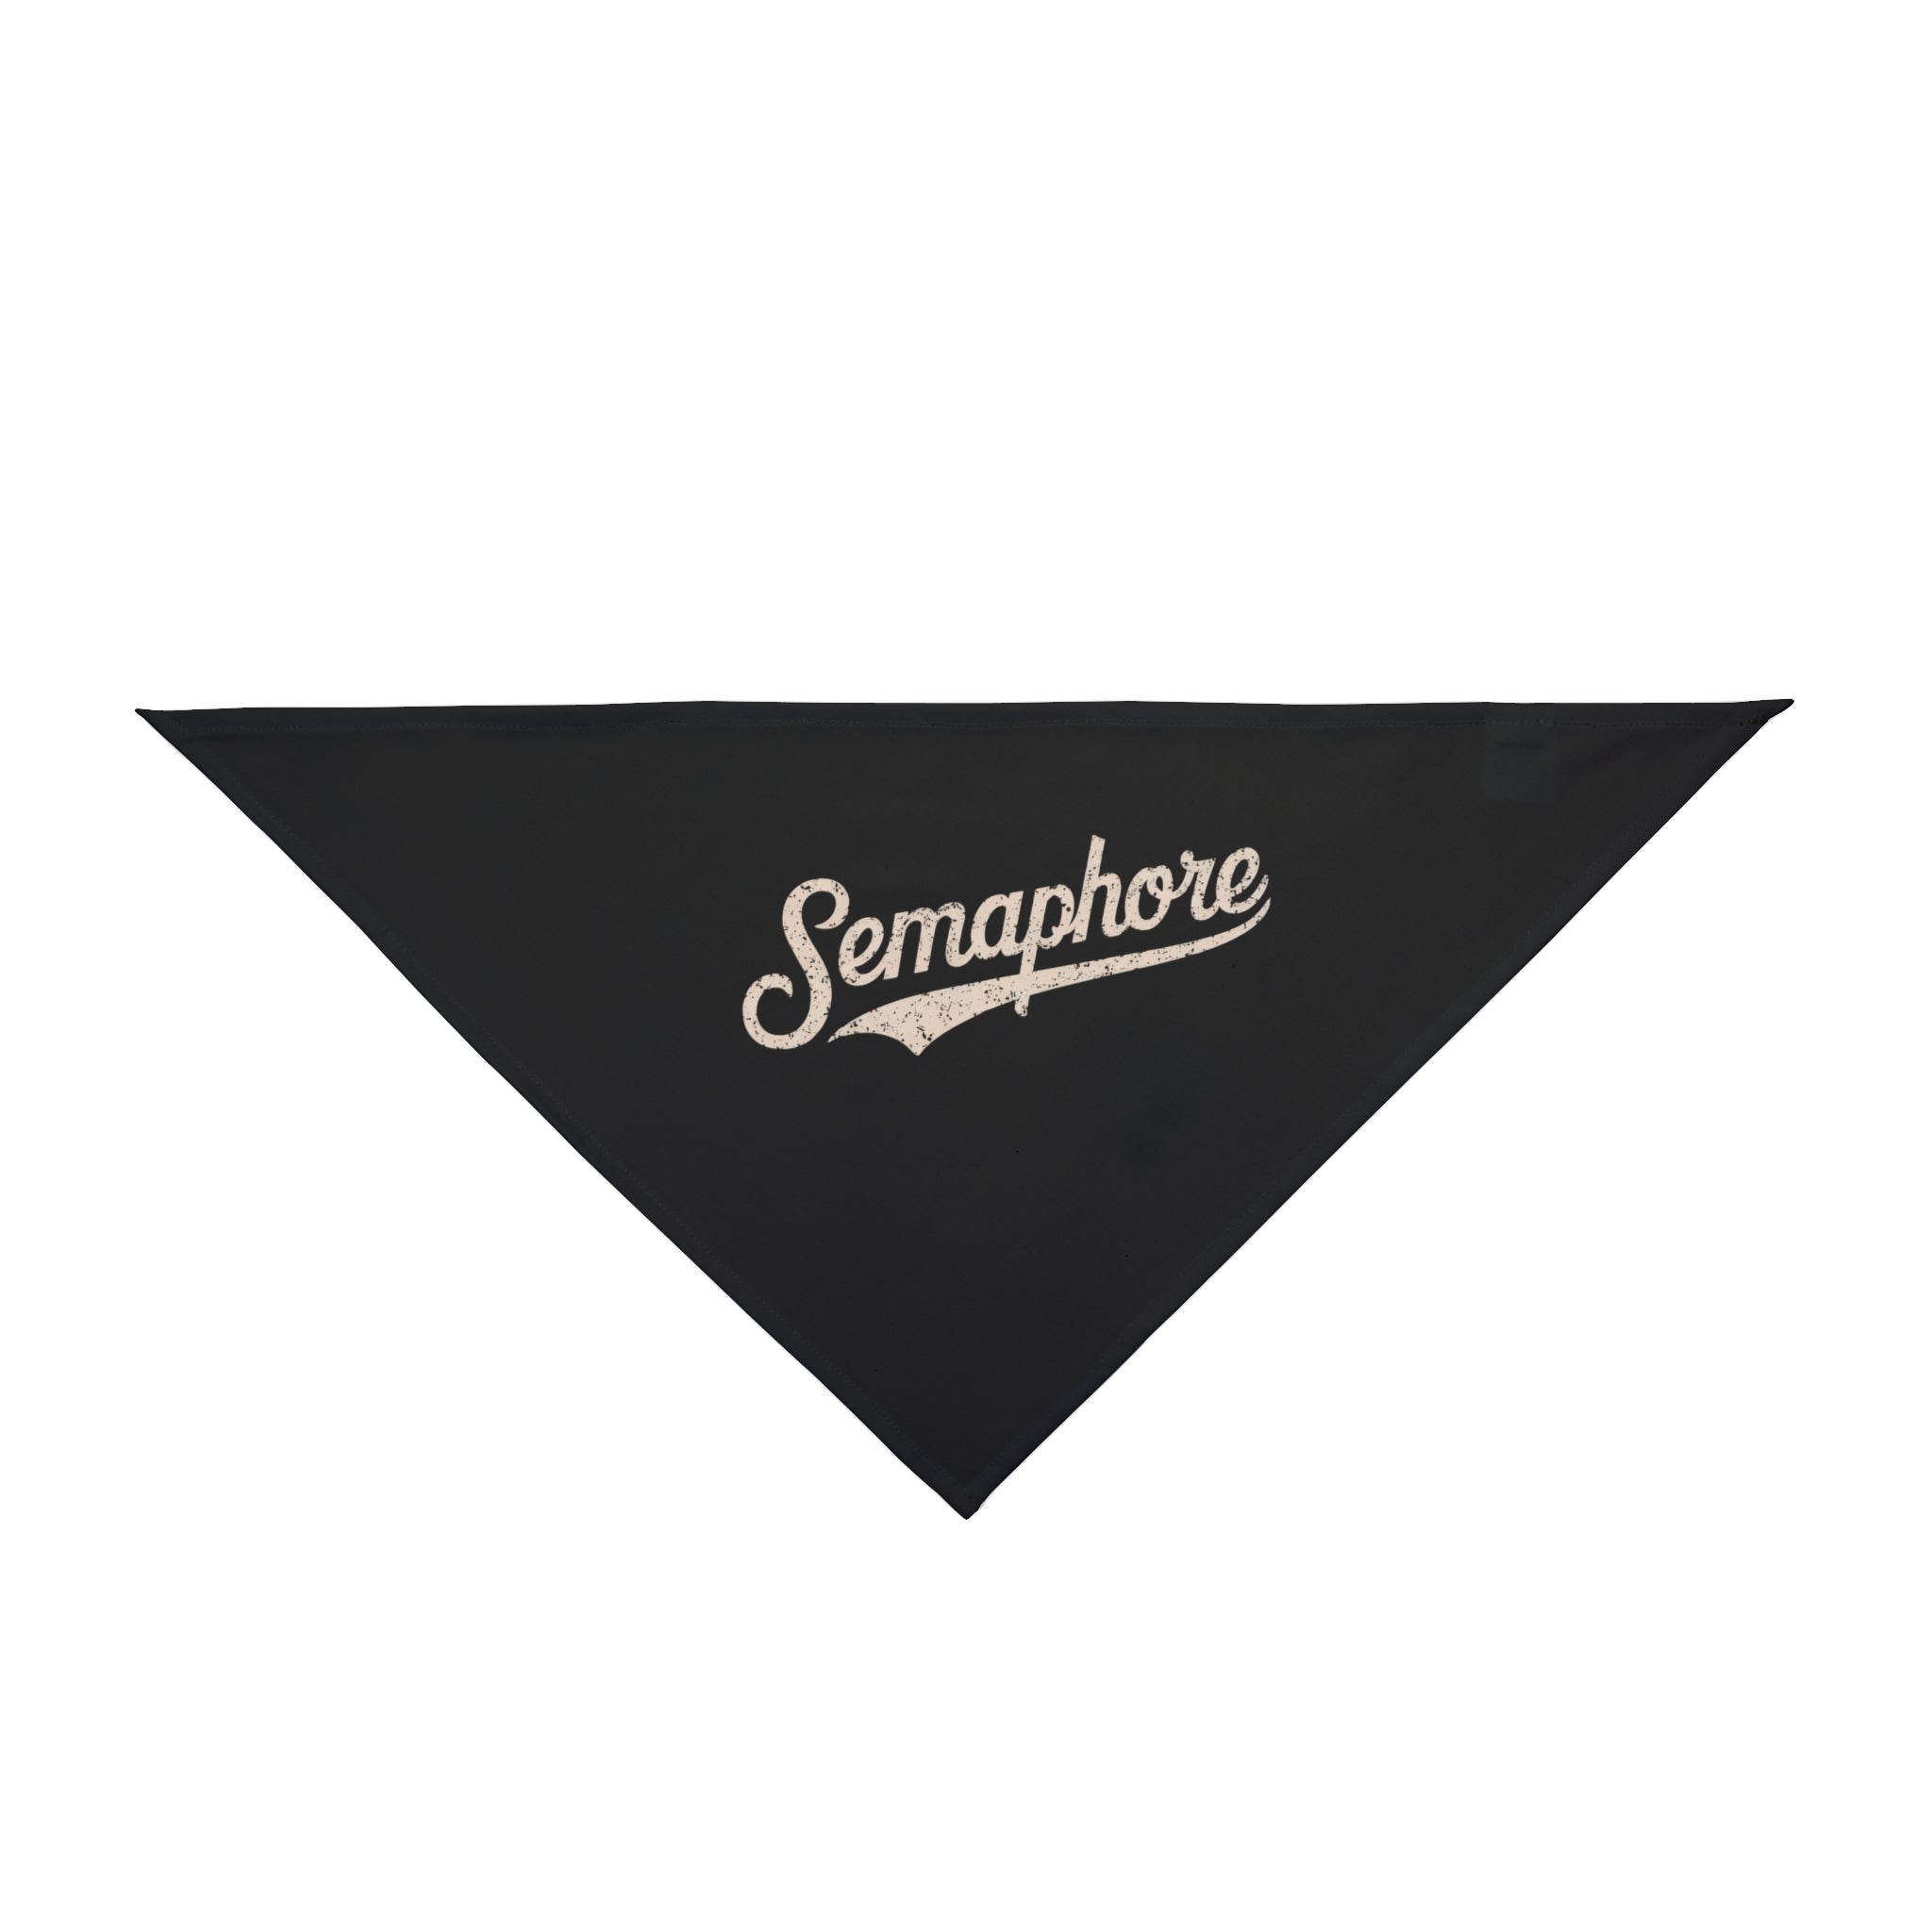 A Semaphore - Pet Bandana crafted from soft-spun polyester, featuring the word "Semaphore" in elegant white cursive text in the center, perfect for your pet's skin.